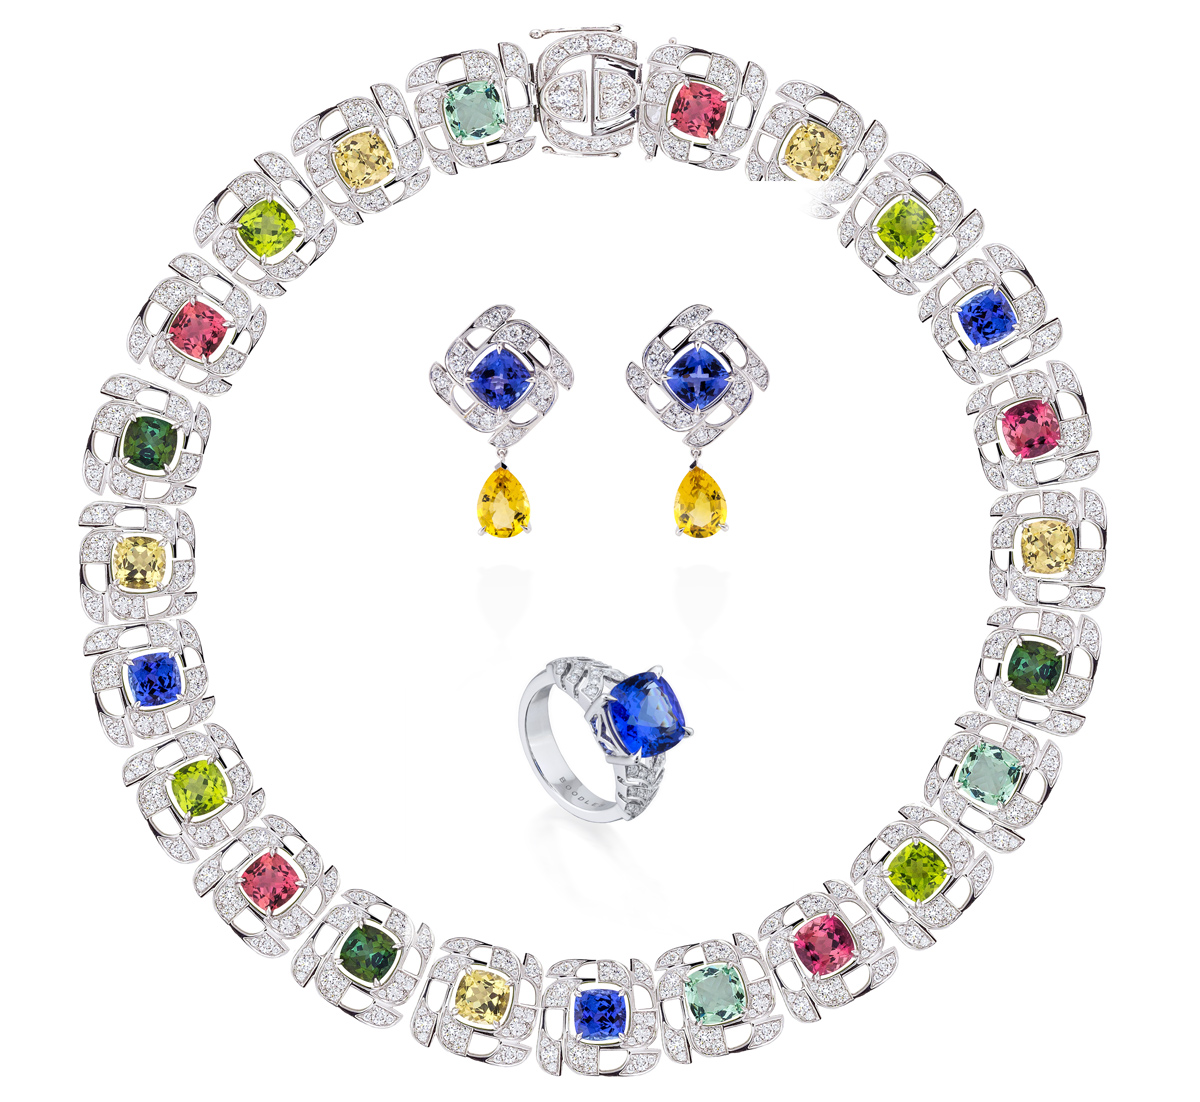 The new “Prism” collection from Boodles